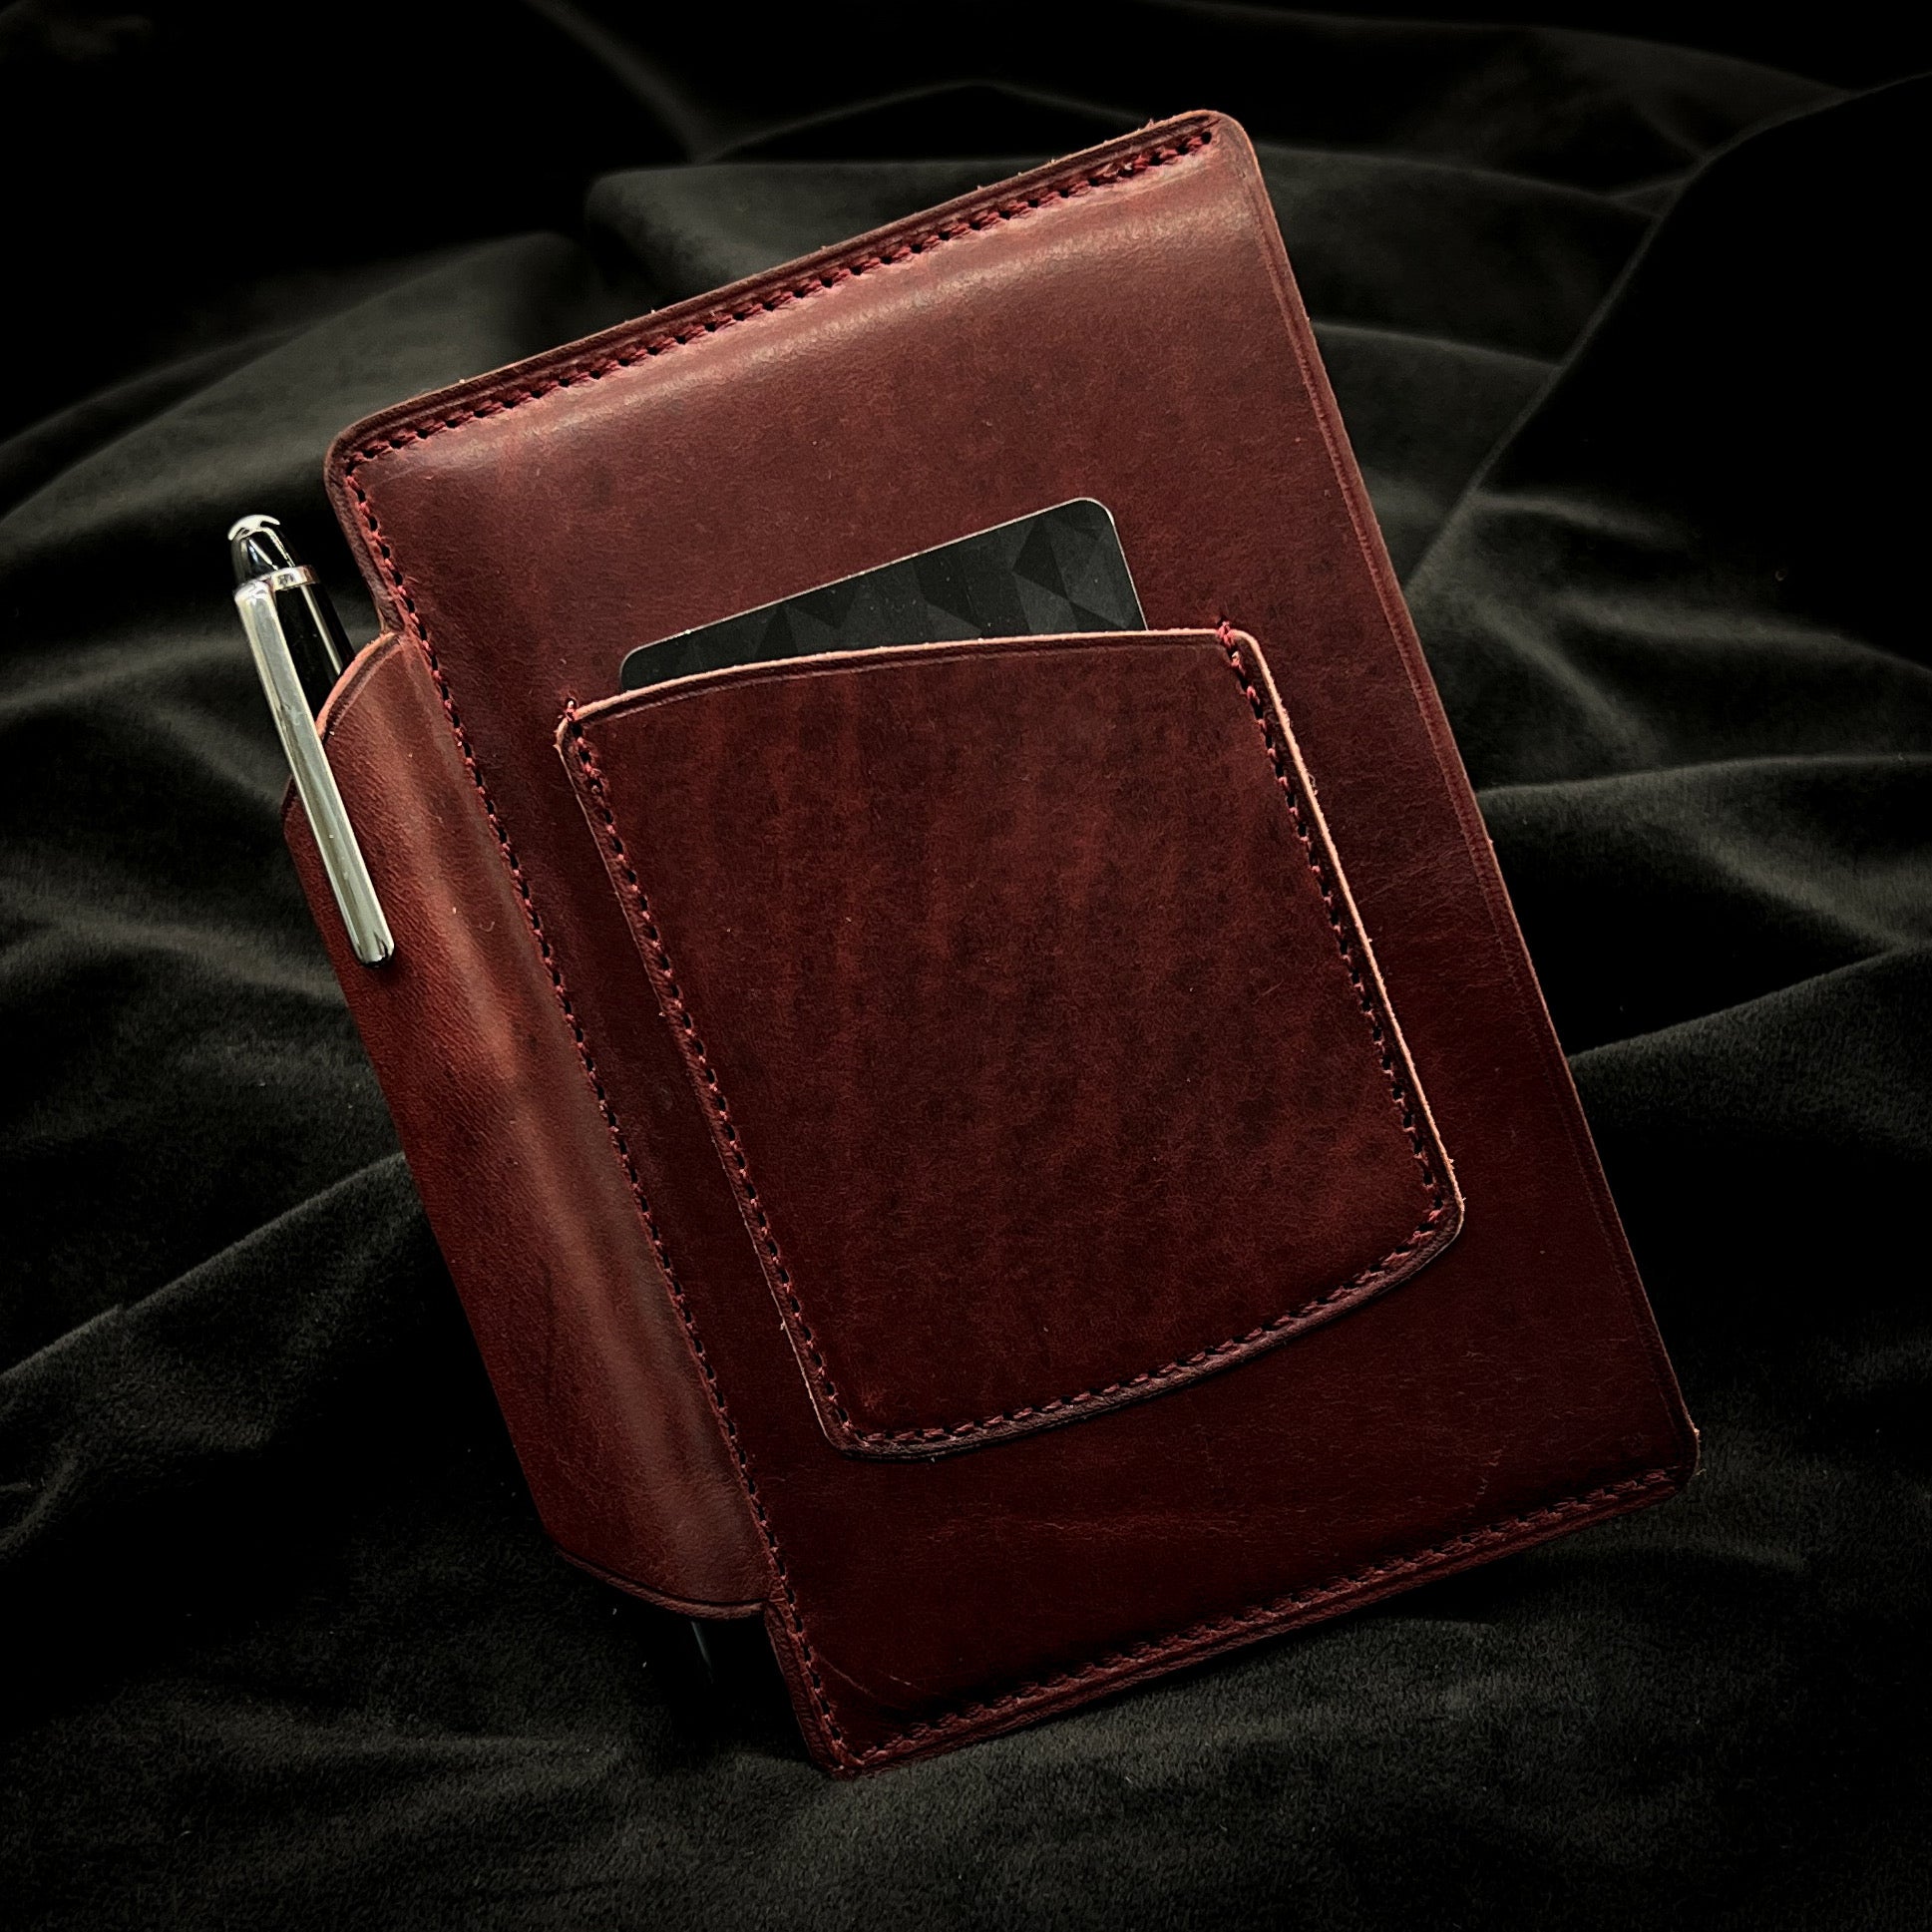 Front Cover of Pocket Notebook Sleeve Cover for 3.5x5.5 inch format notebooks in Horween leather.  Handmade to order by Custom Leather and Pen in Houston, TX